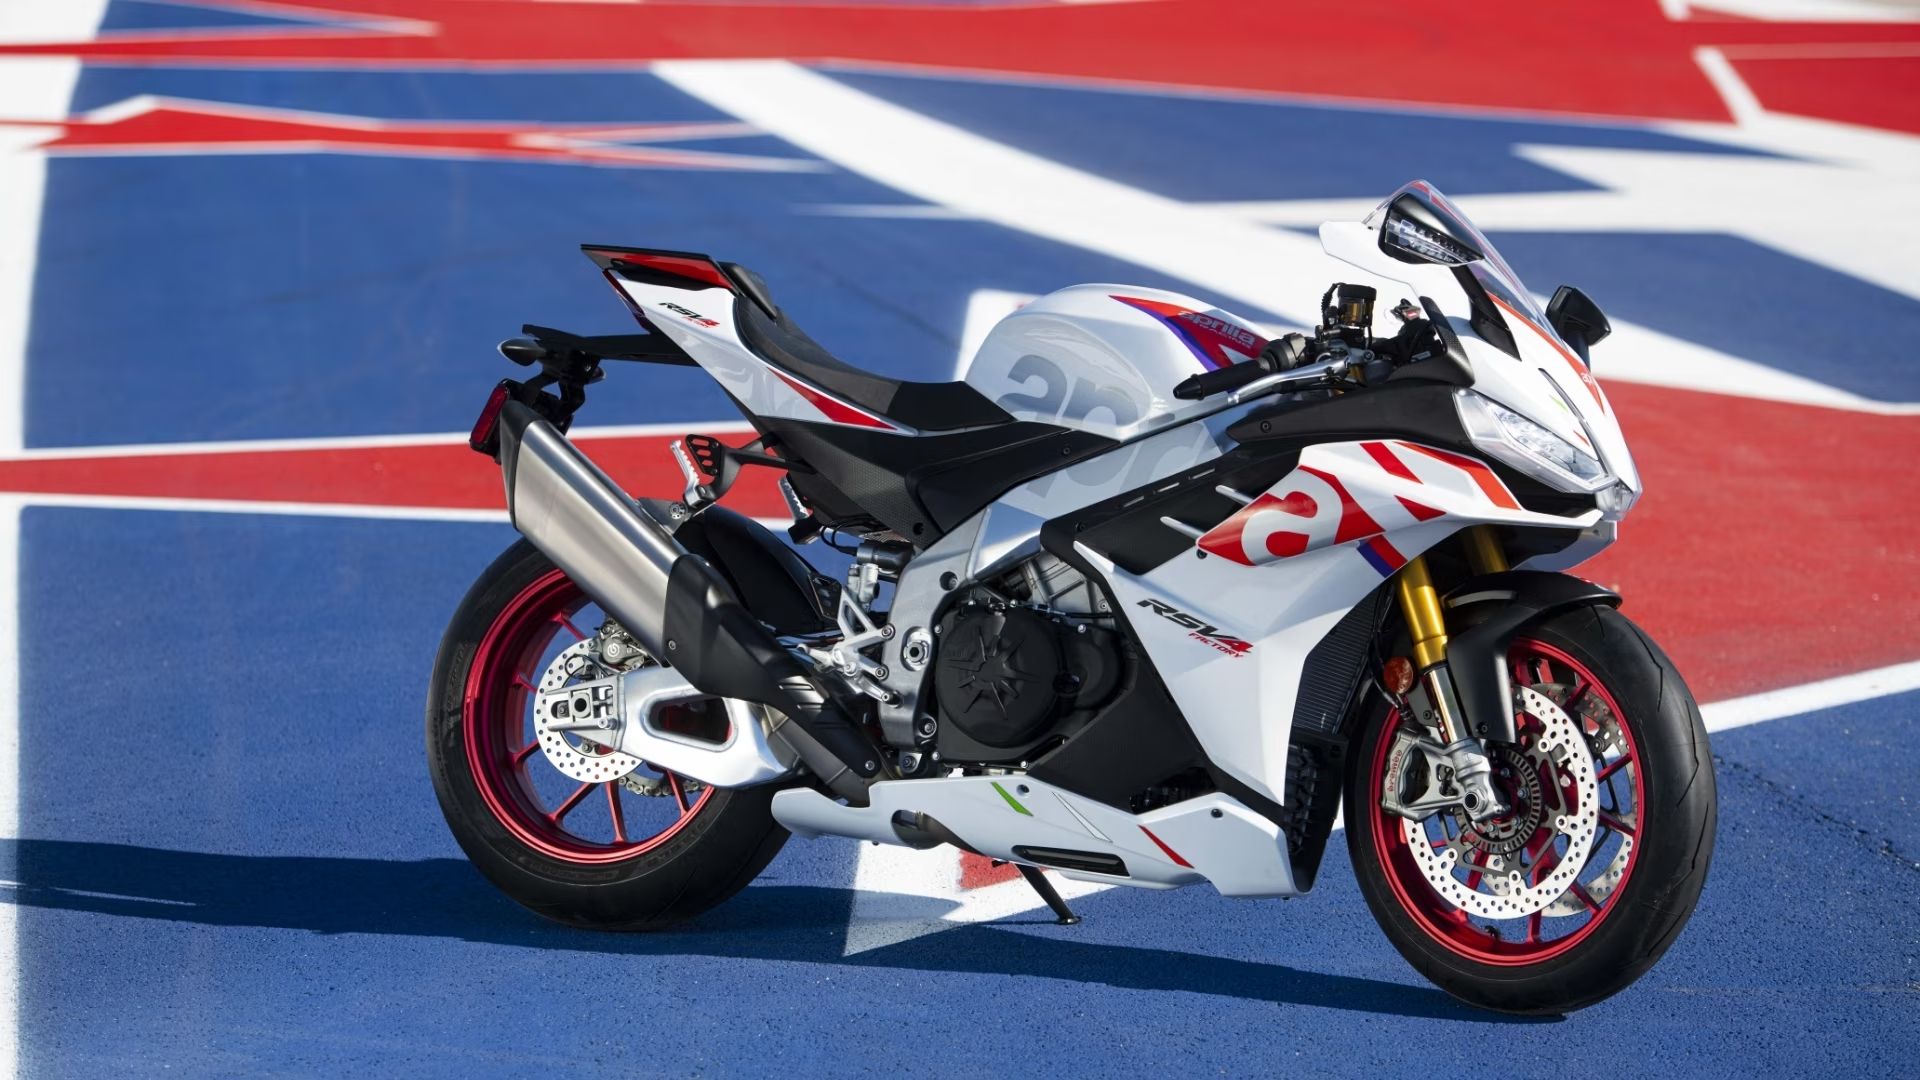 10 Sports Bikes So Perfect Aftermarket Upgrades Should Be Illegal